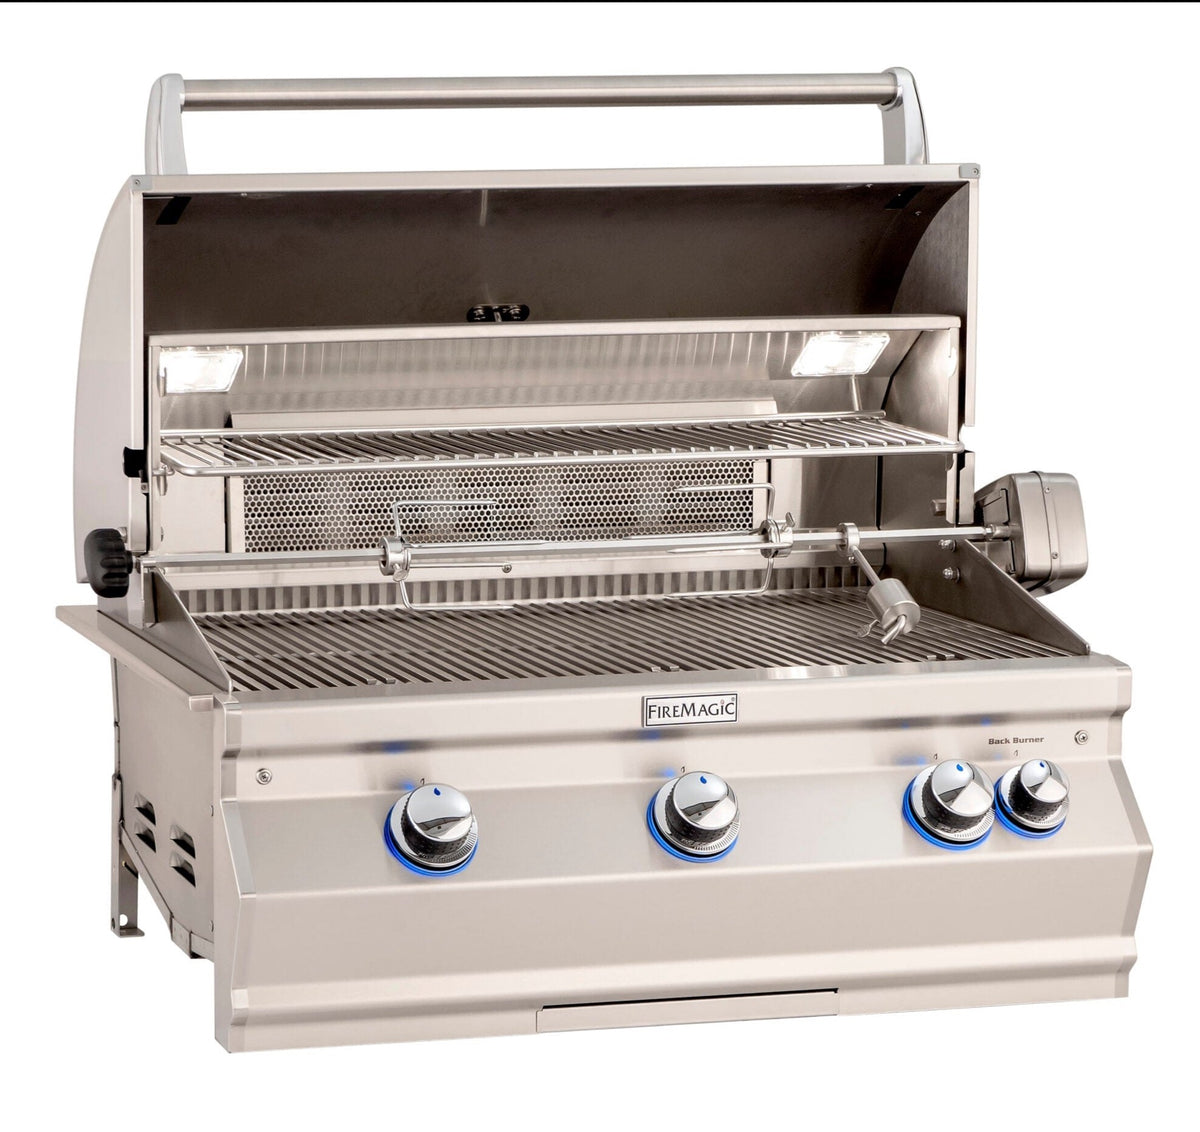 Firemagic Grills Fire Magic Aurora 30&quot; Built-In Grill with Analog Thermometer / A540i